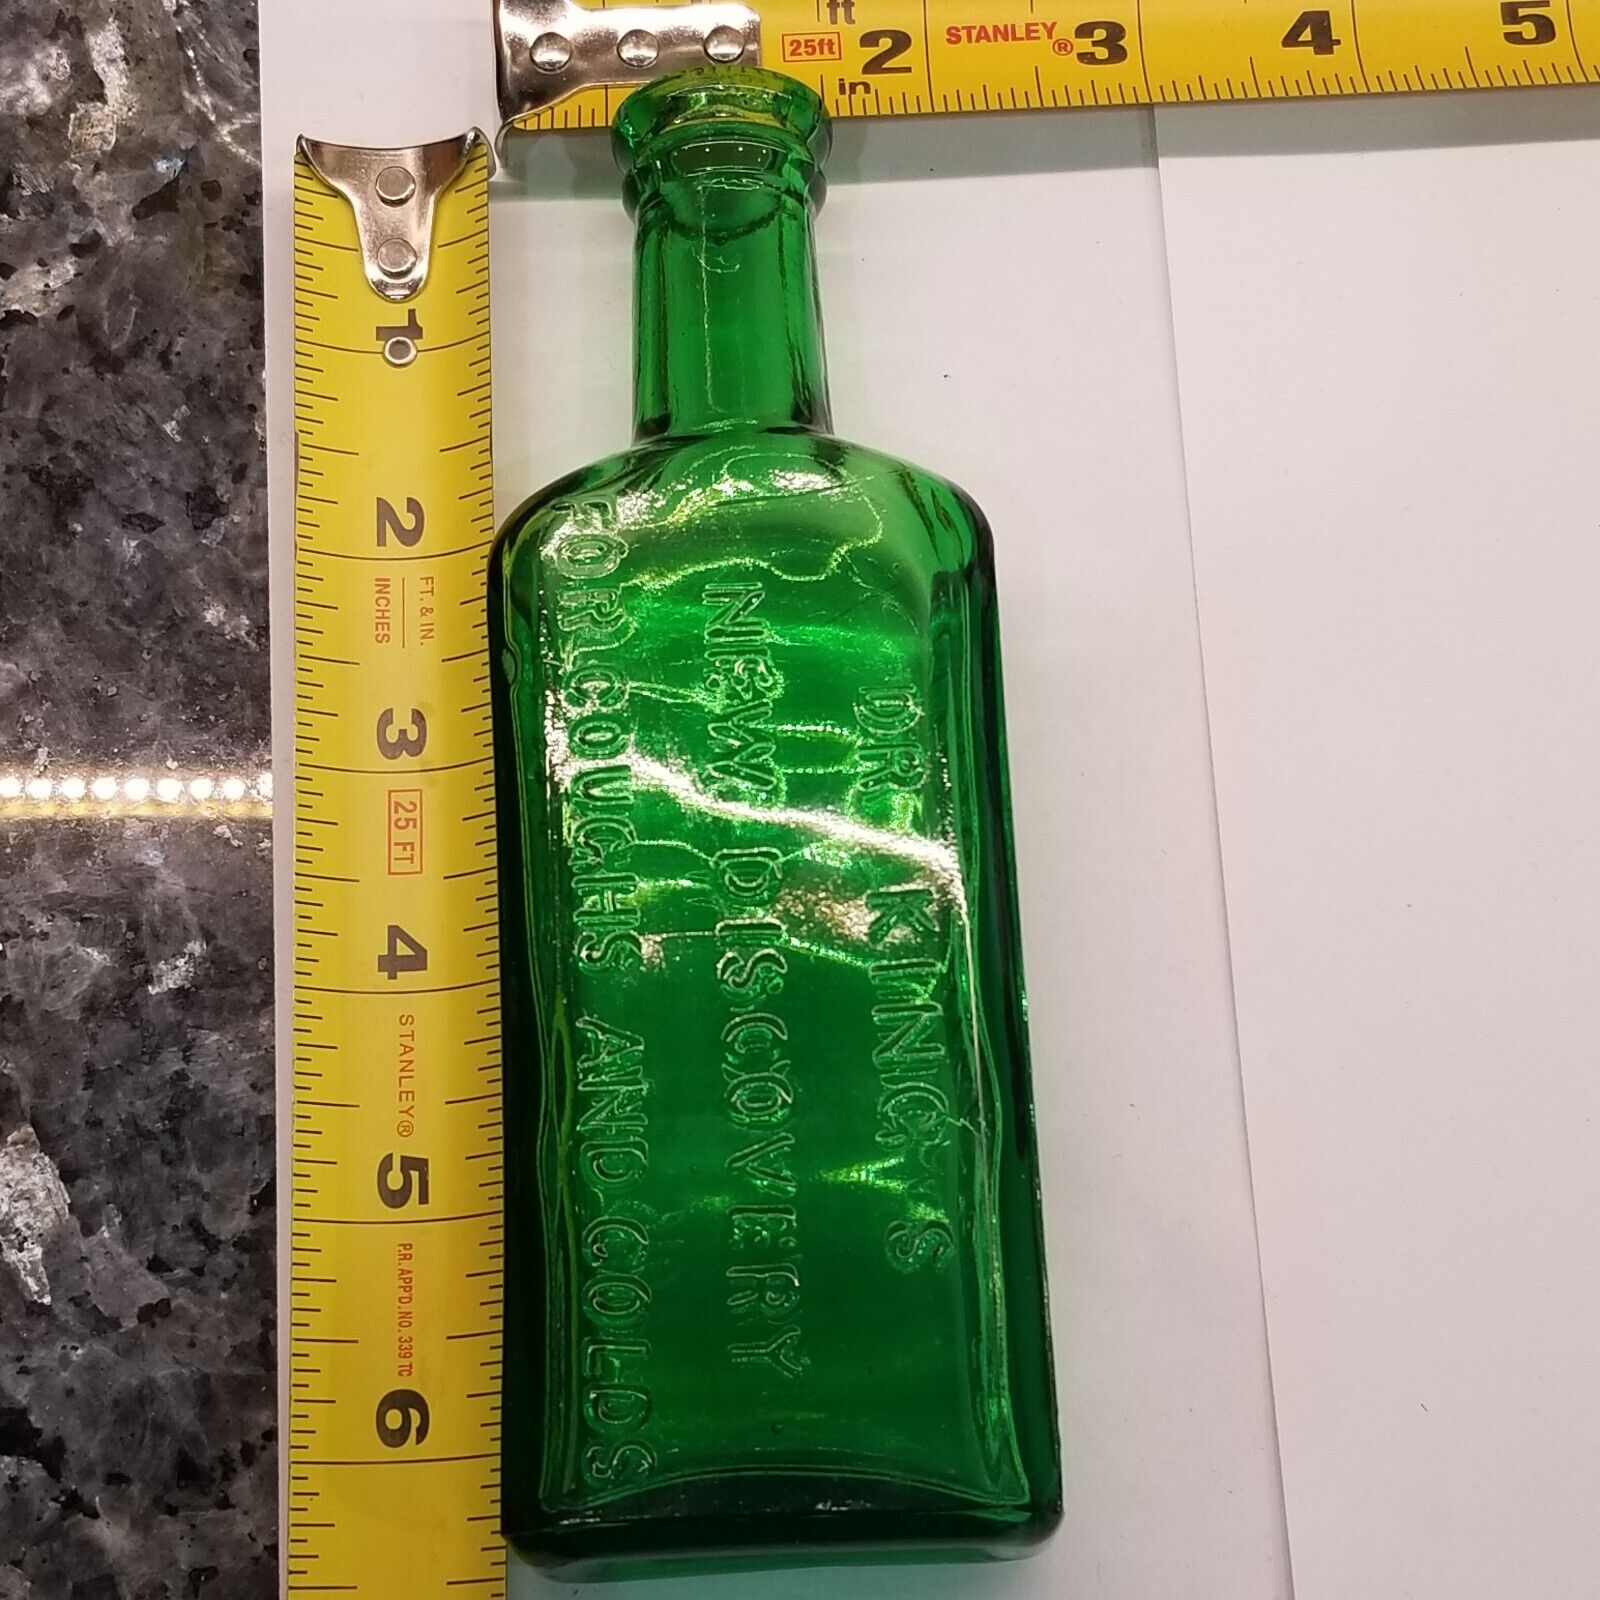 Antique Emerald Green DR KINGS NEW DISCOVERY FOR COUGHS AND COLDS Syrup Bottle